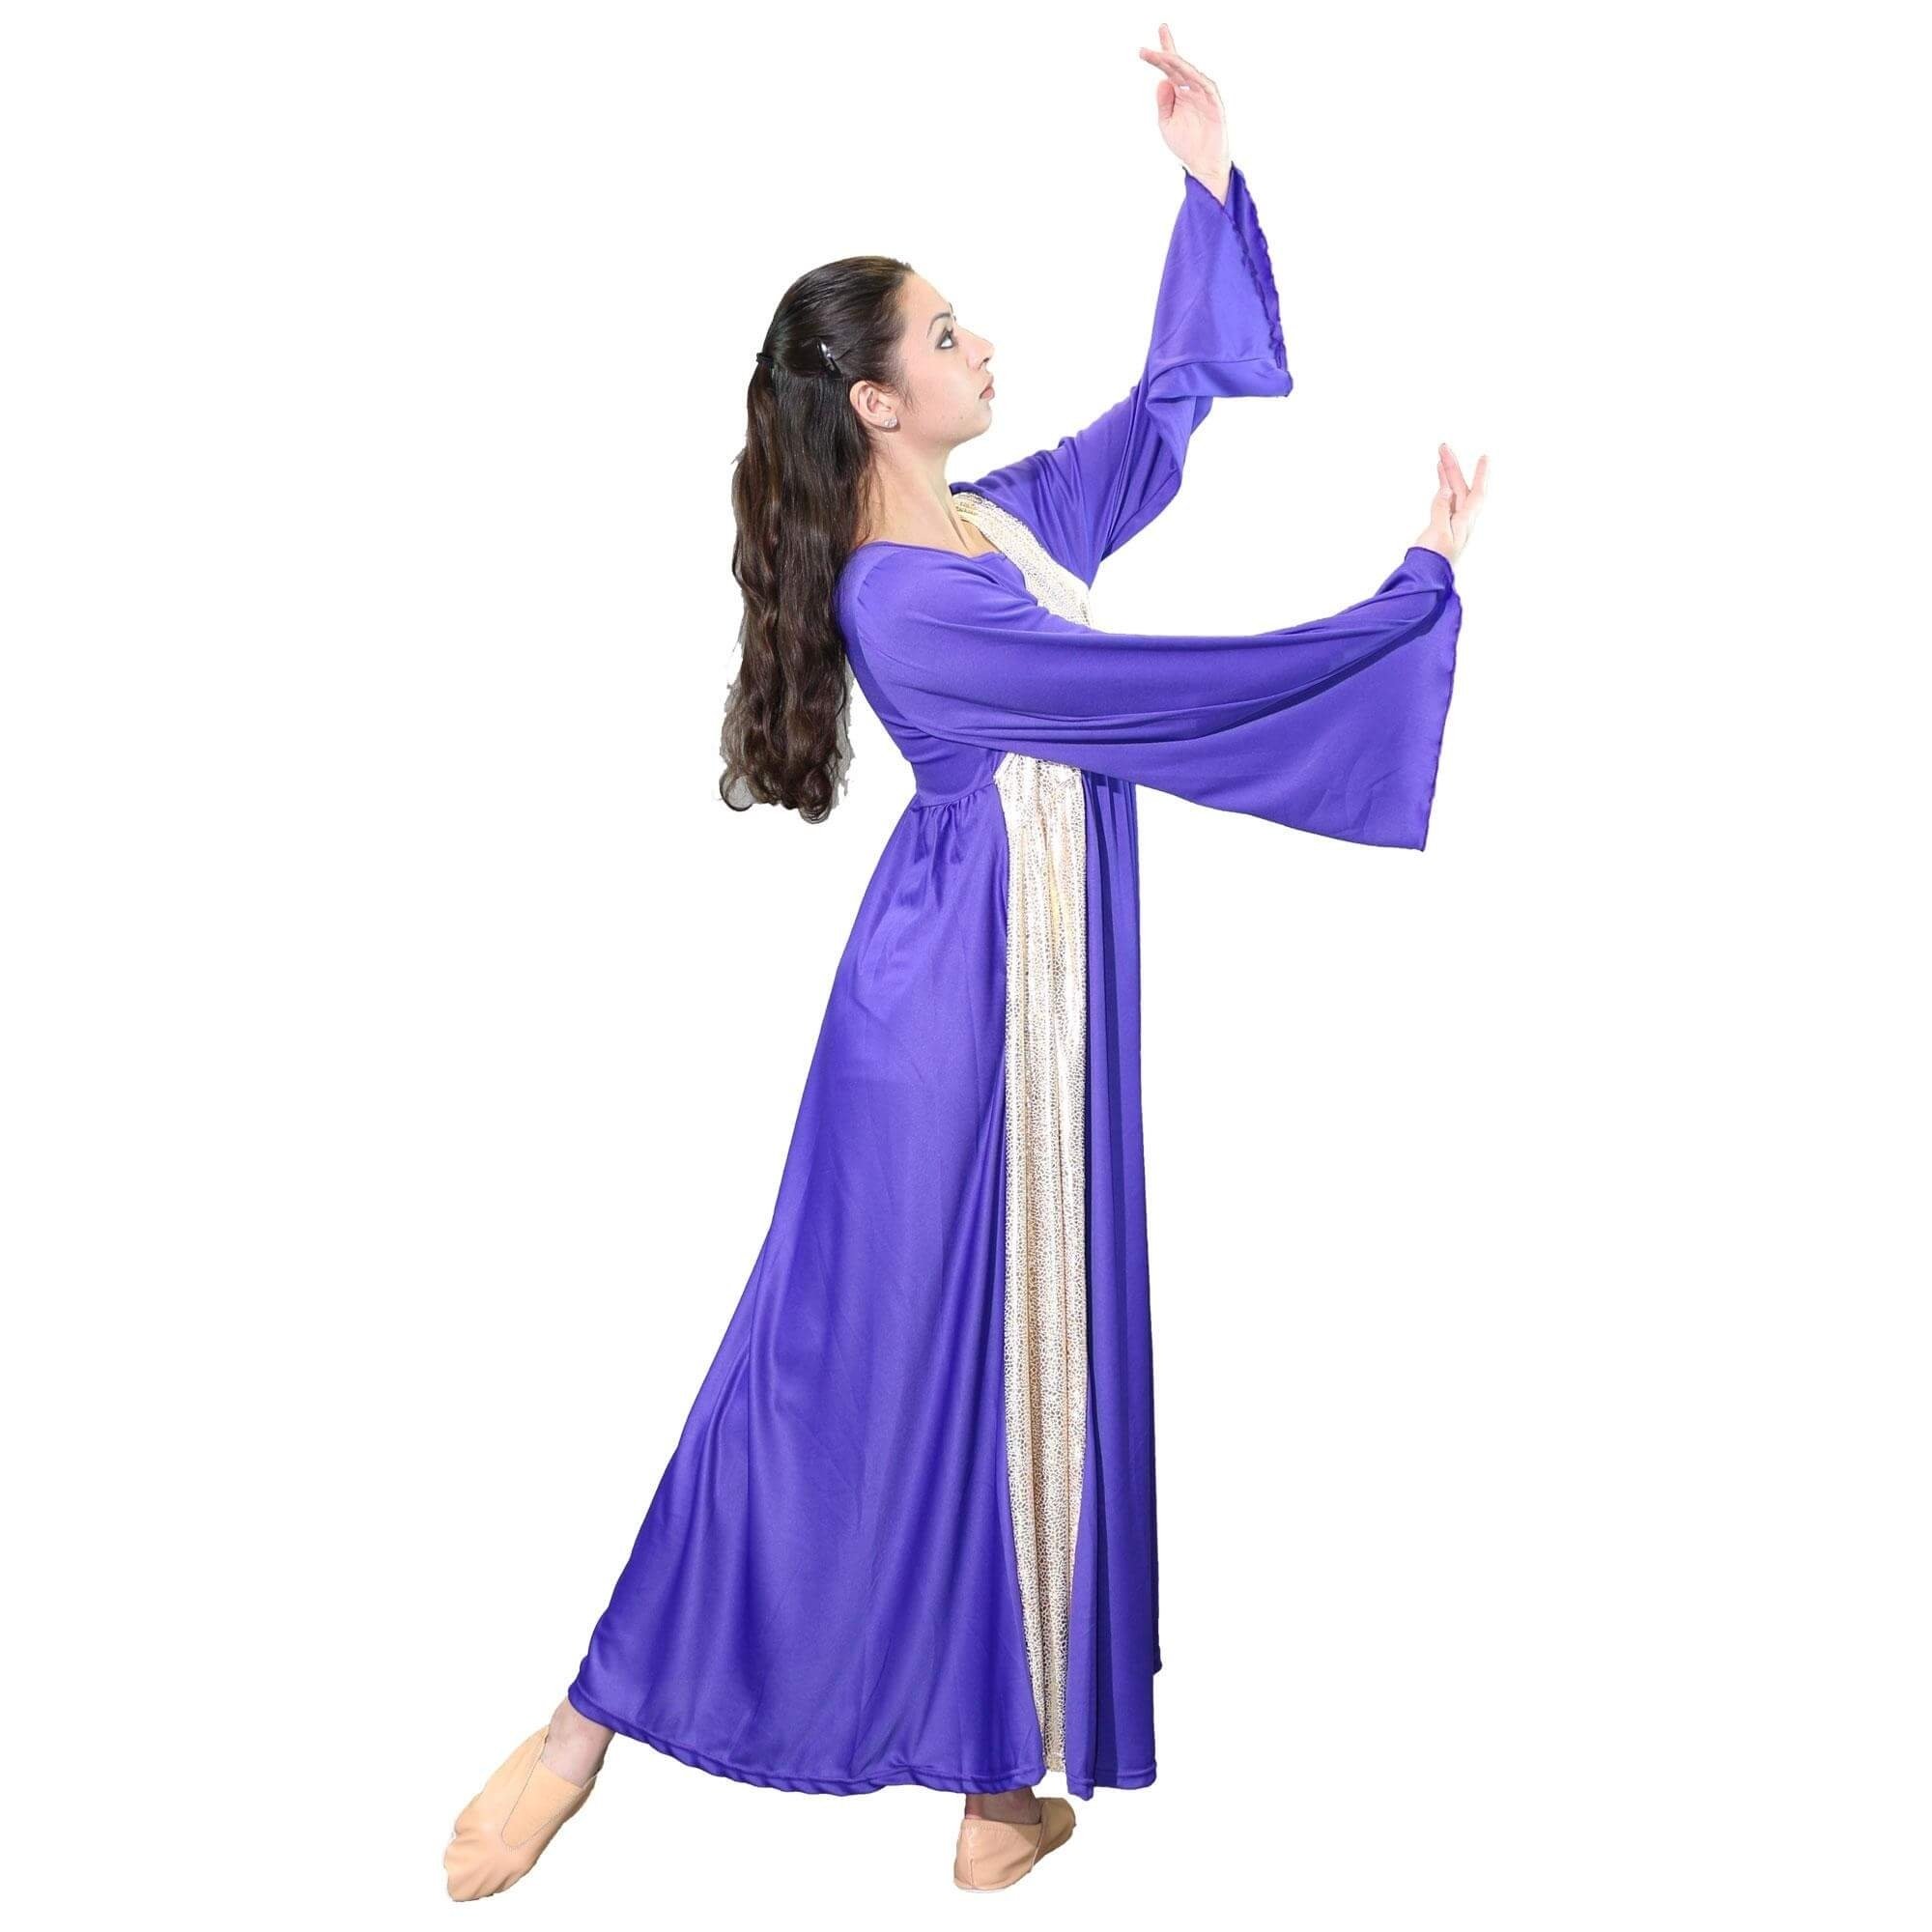 Danzcue Praise Dance Shimmery Asymmetrical Bell Sleeve Dress - Click Image to Close